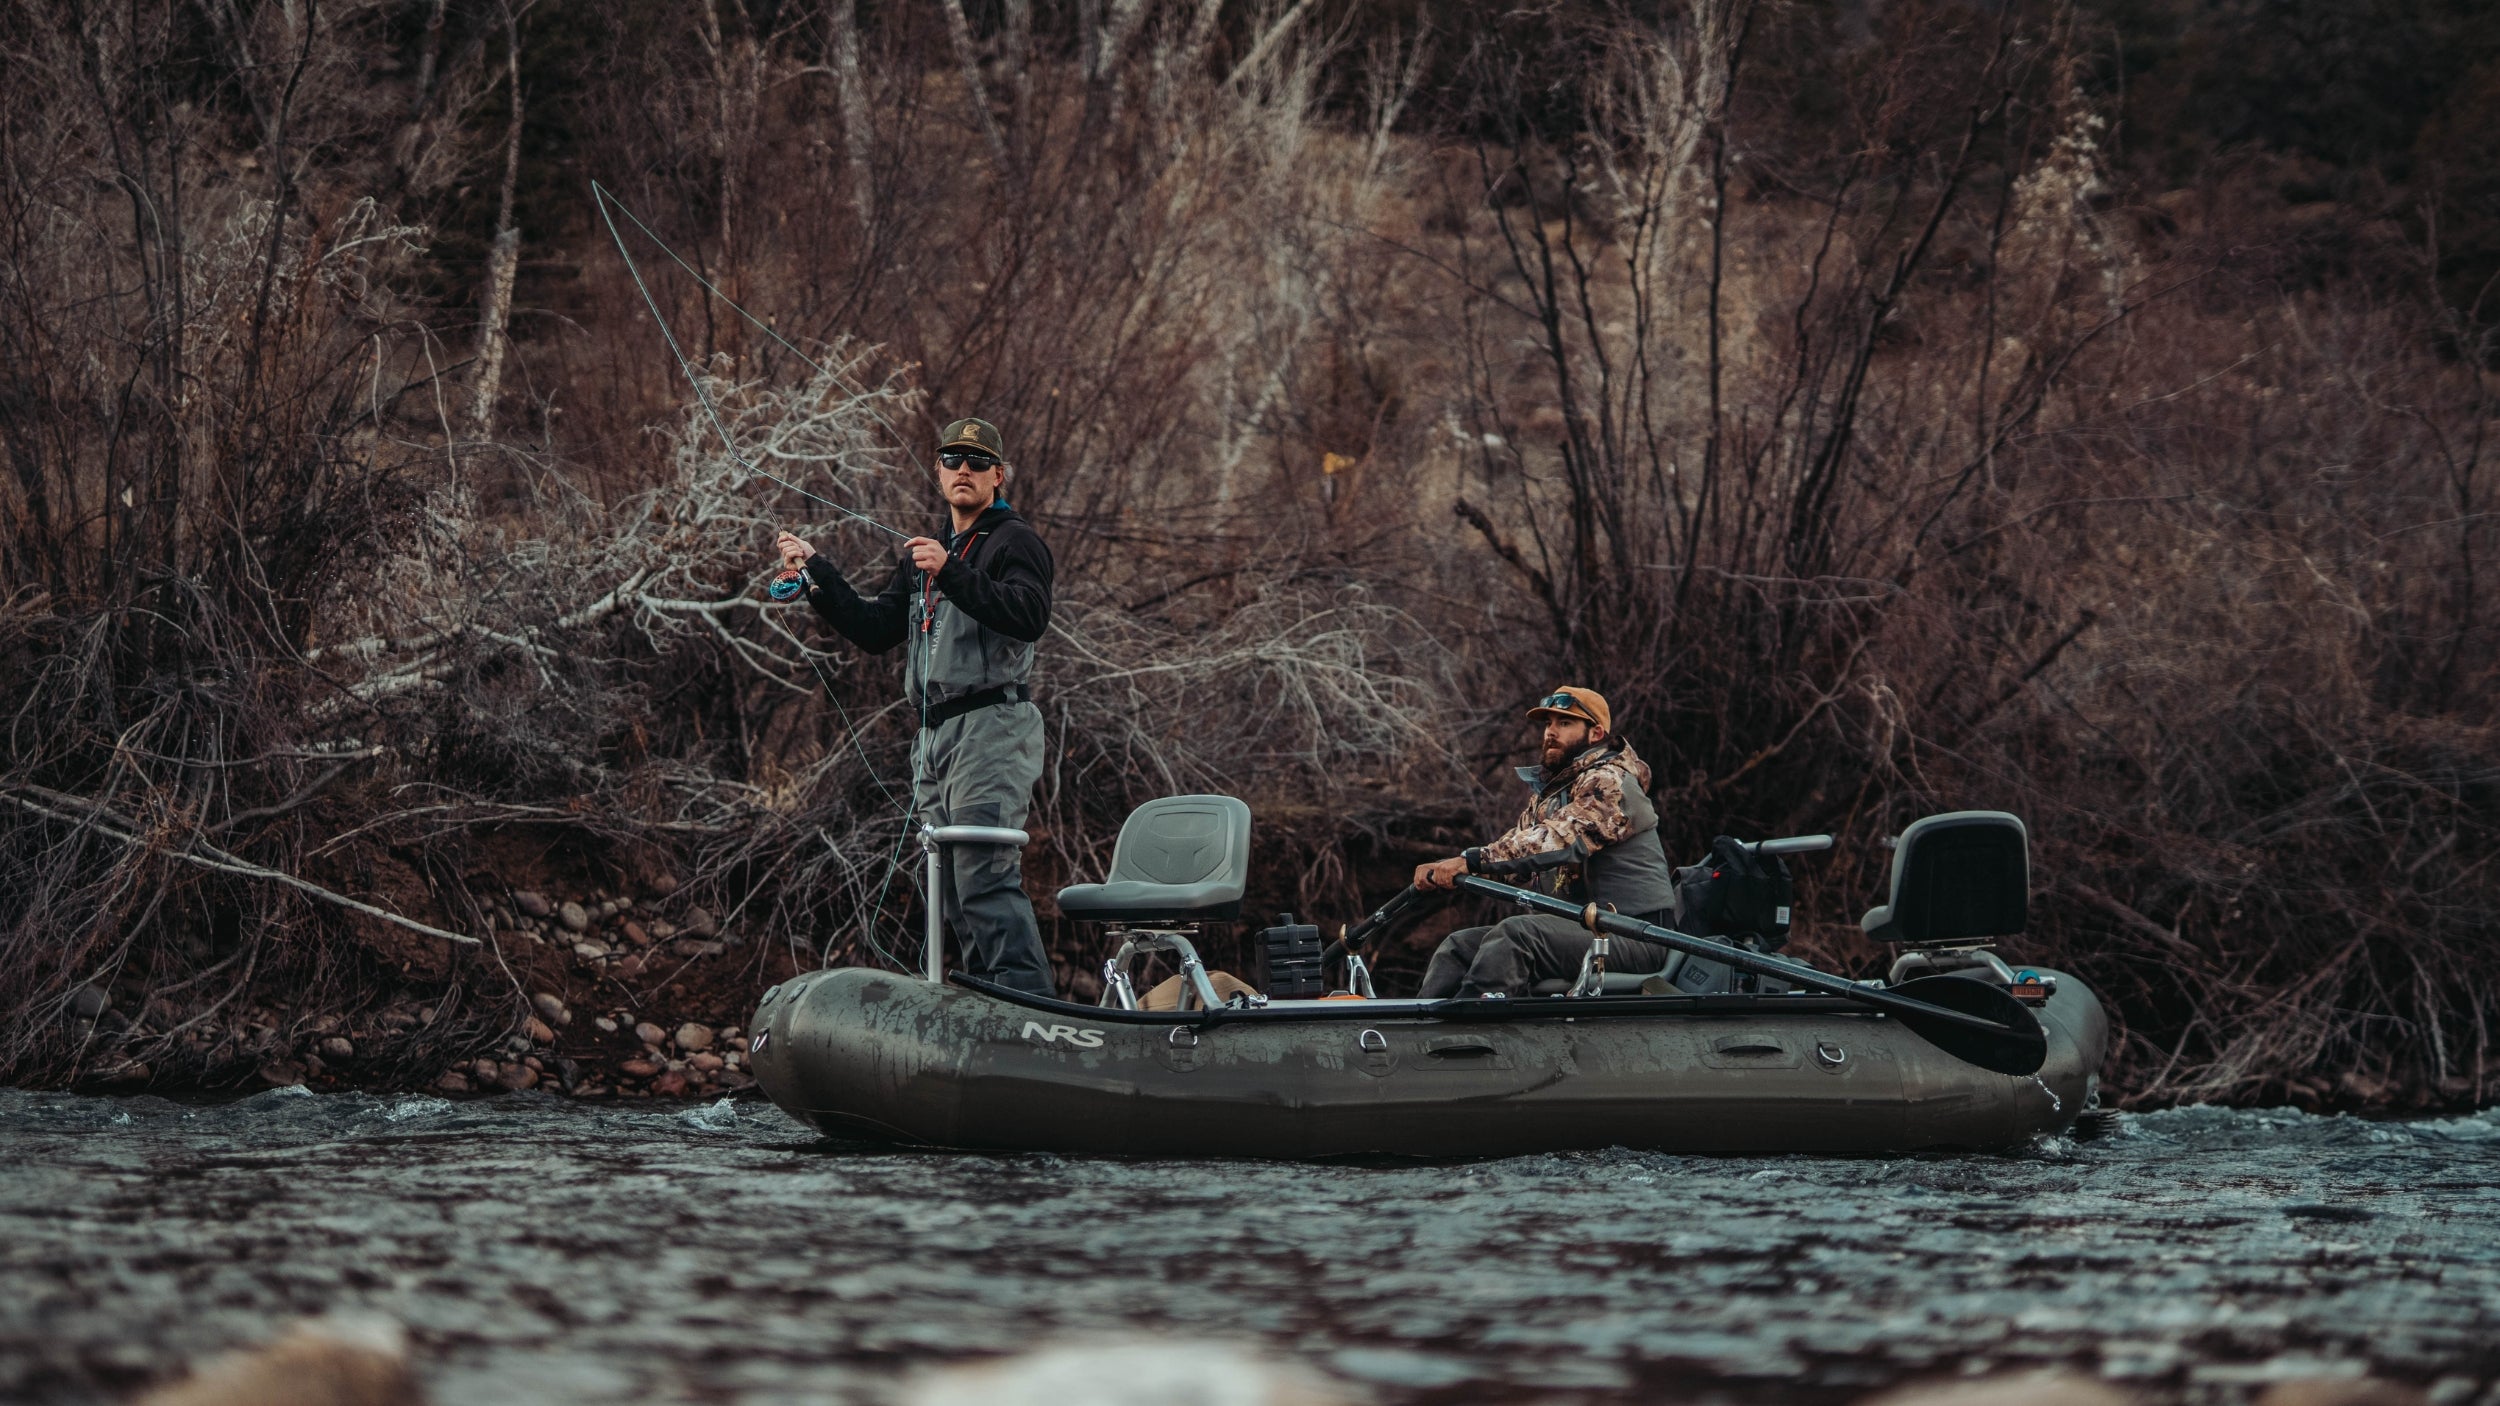 Exciting New Riversmith Swiftcast Raft Rod Holders, Reviewed - Fly Fisherman